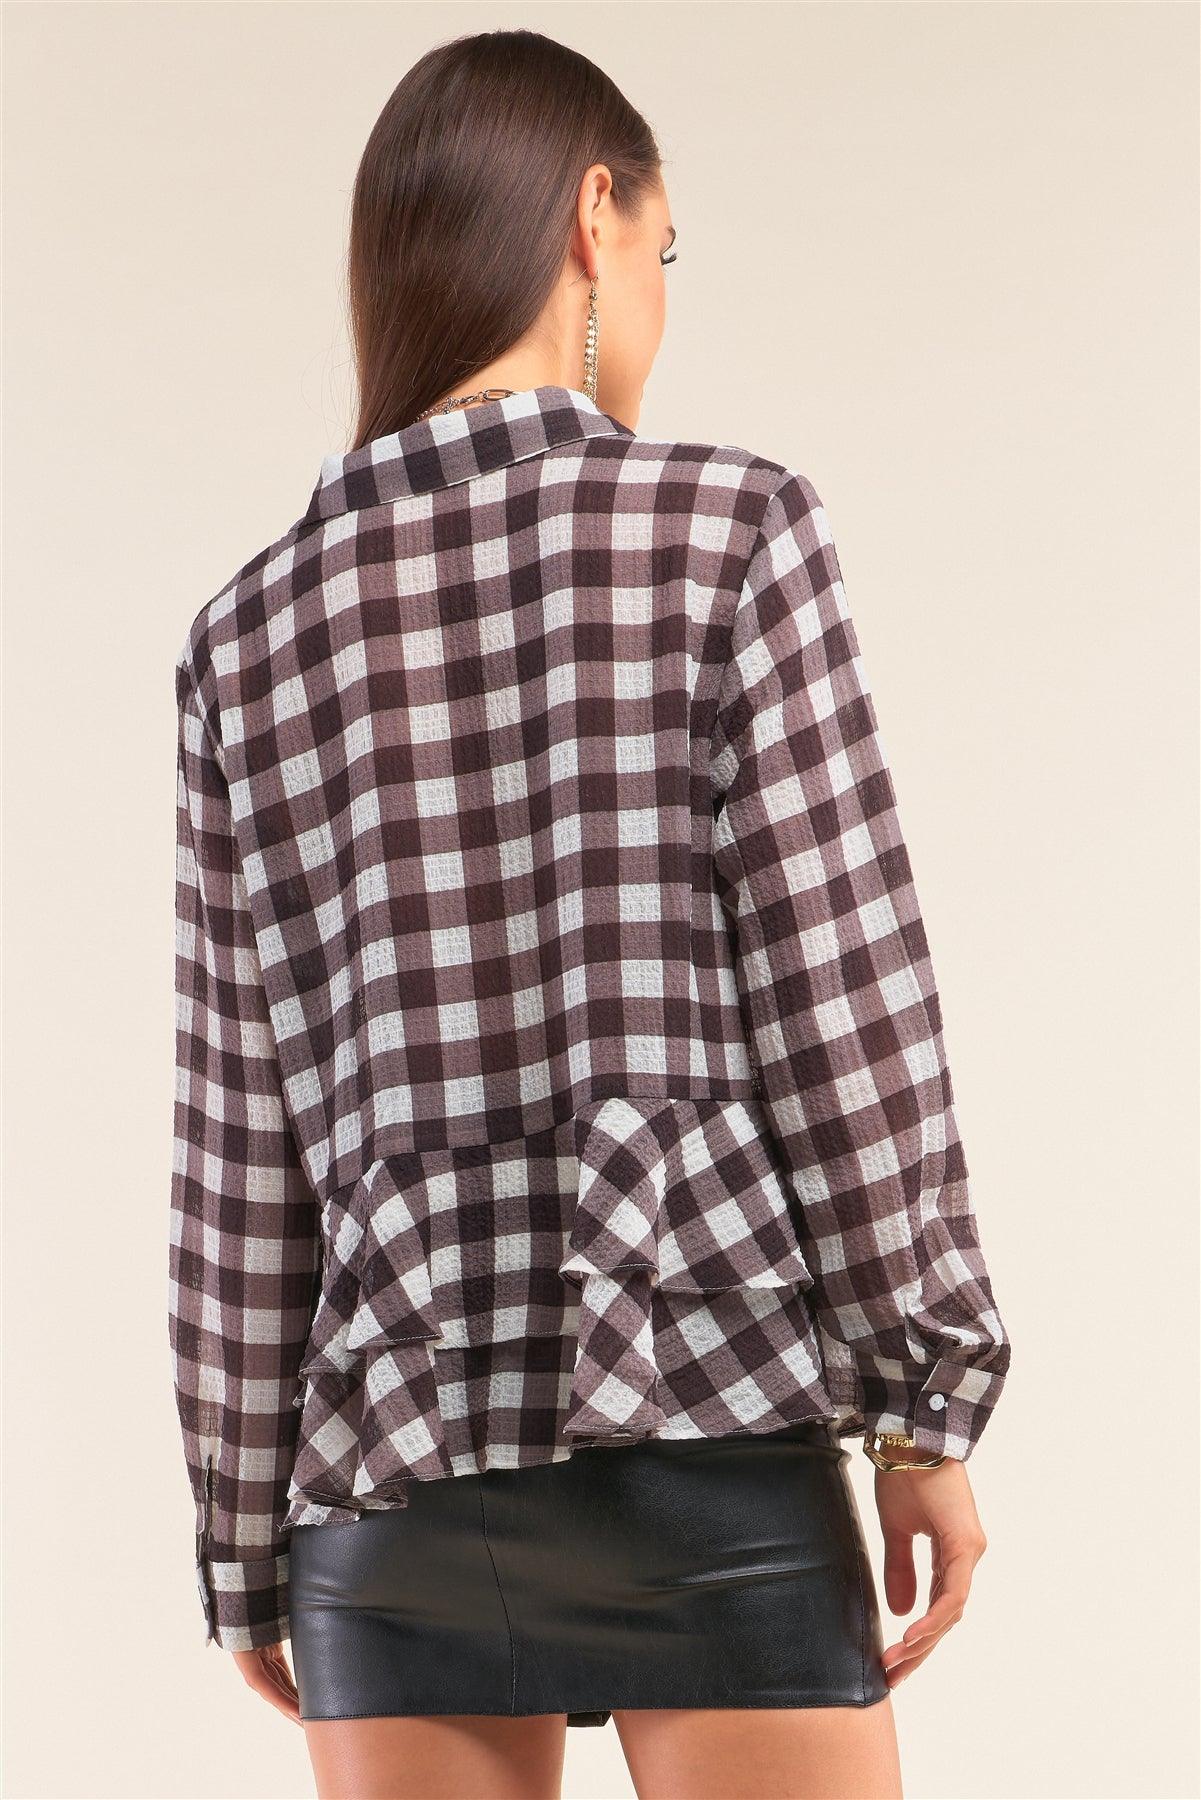 Back To School Black&White Checkered Crinkle Mesh Long Sleeve Collared Button Down Flare Hem Shirt /1-2-2-1